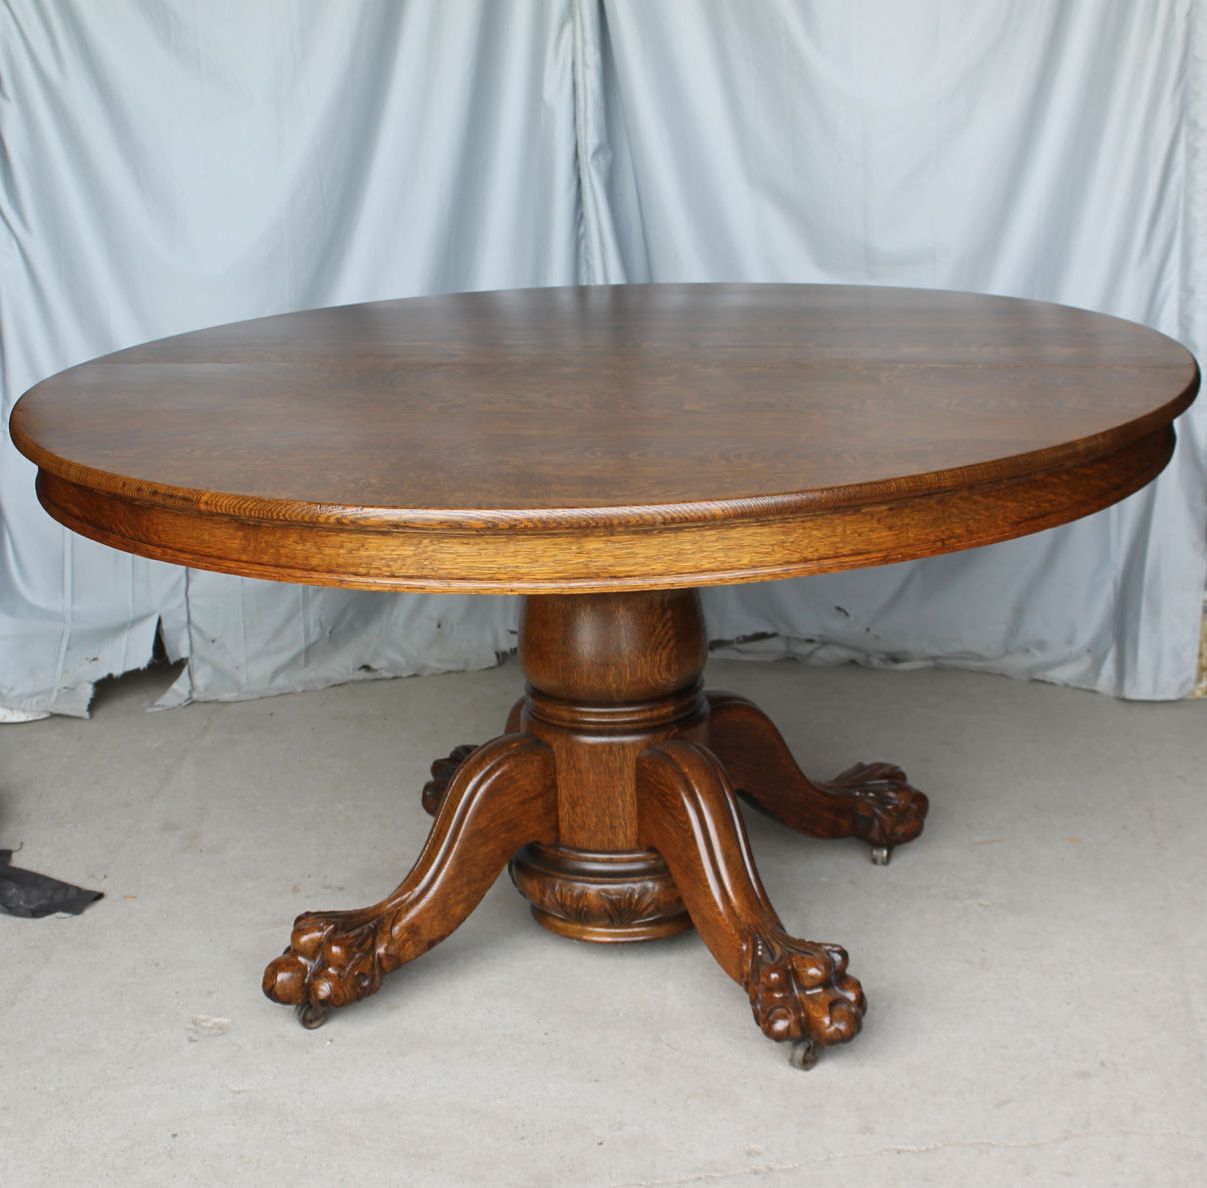 Antique Round Oak Dining Table Intended For Vintage Brown Round Dining Tables (View 8 of 20)